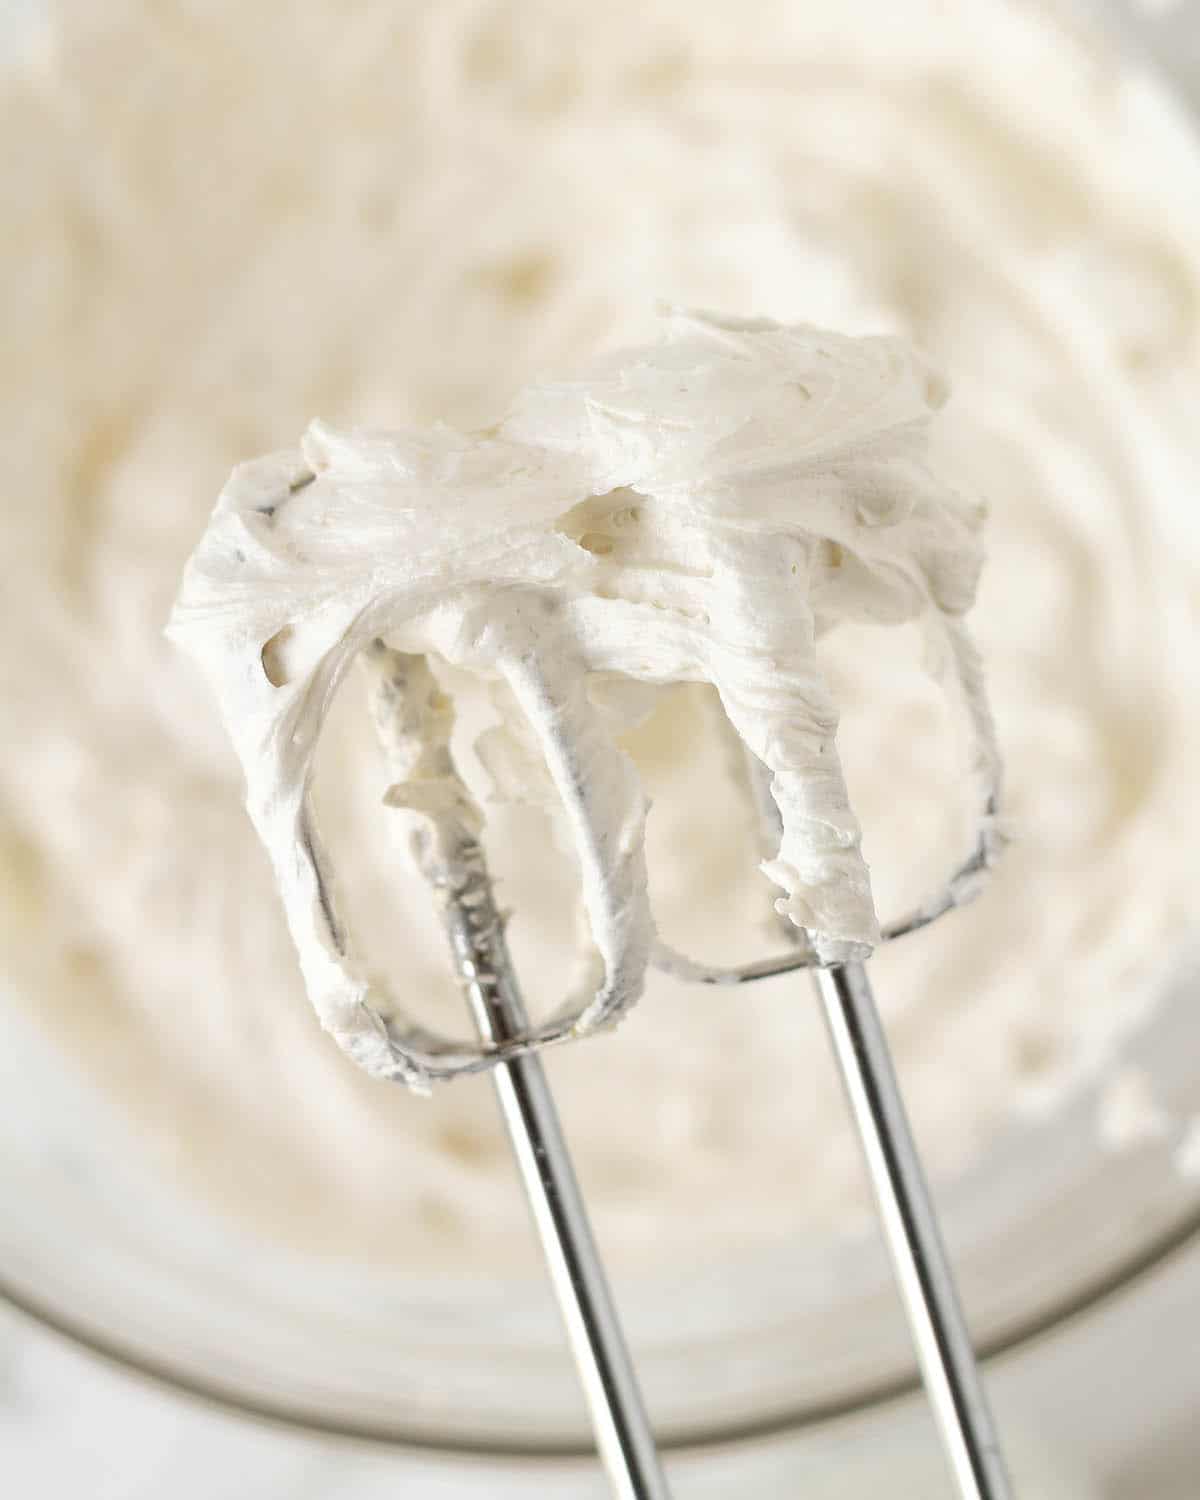 Image shows lemon frosting on the beaters of an electric mixer.